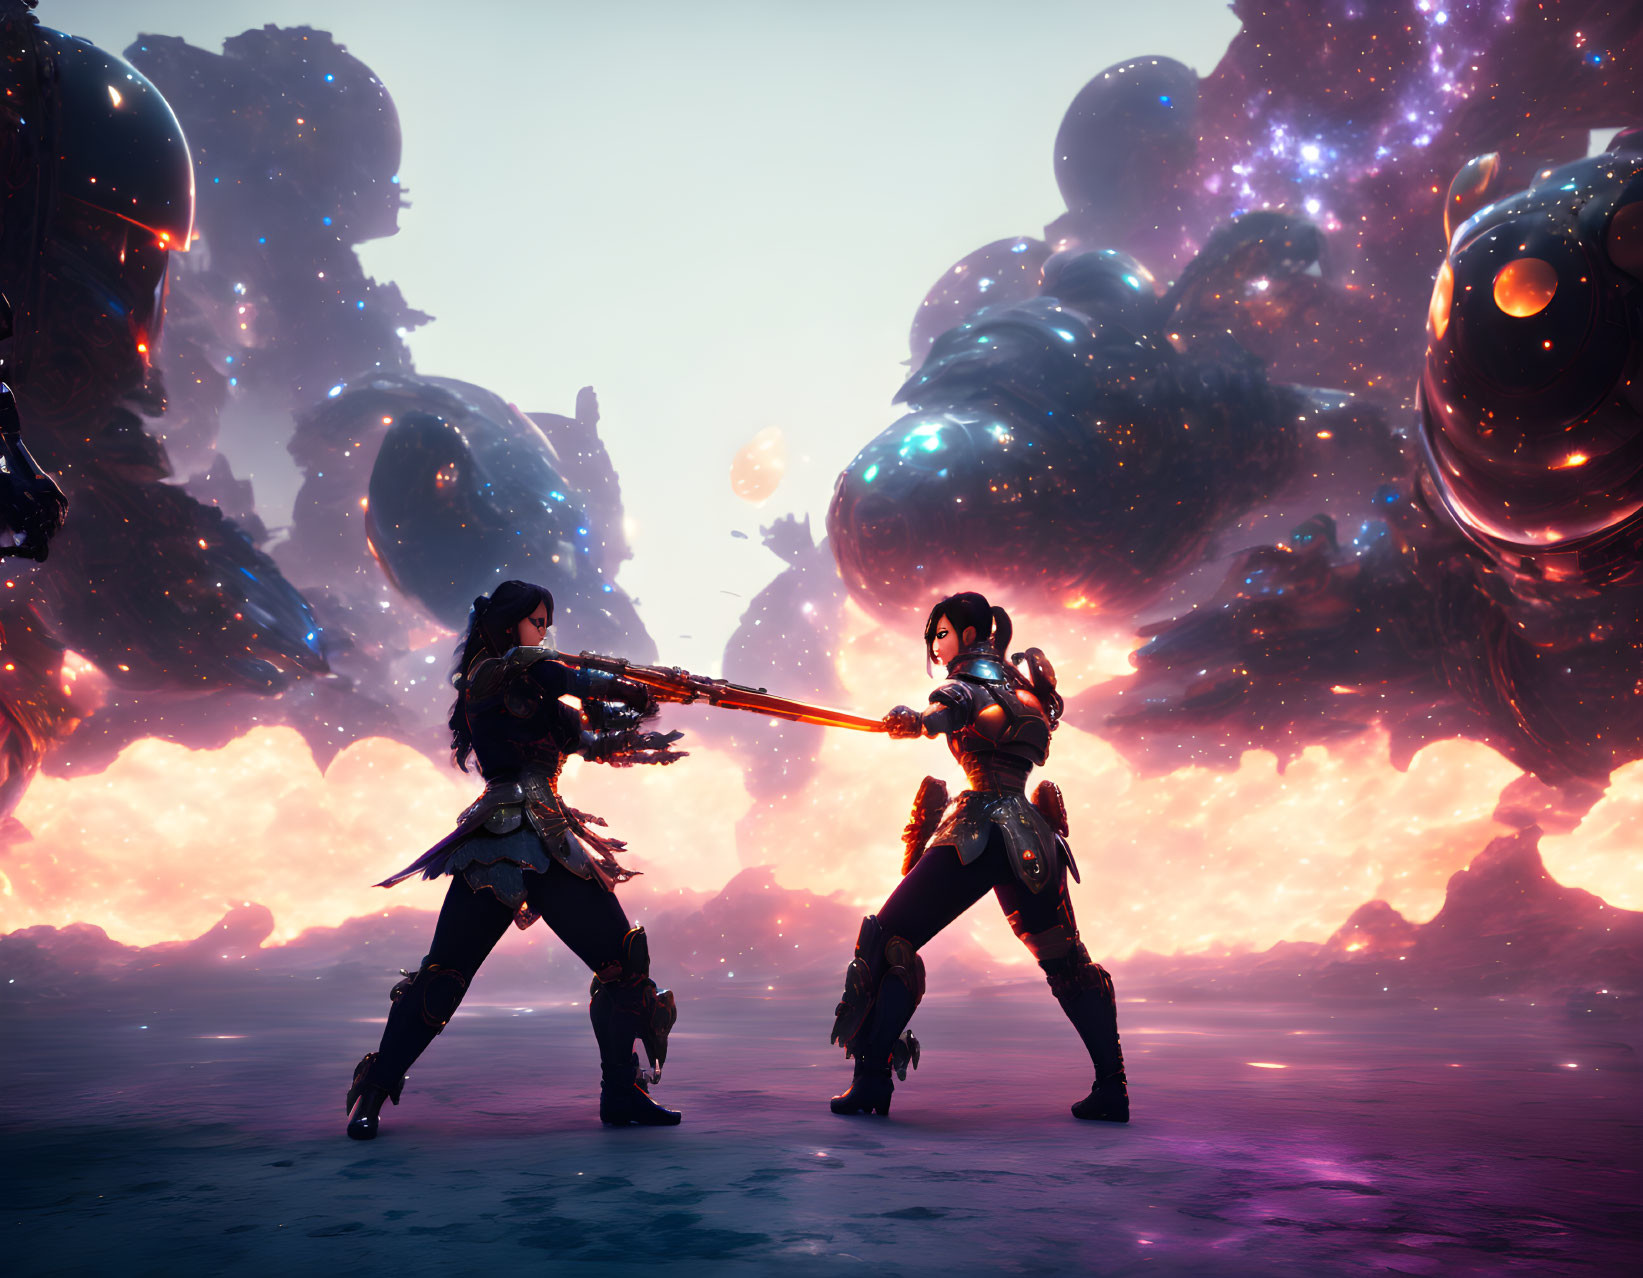 Futuristic warriors duel with energy weapons on alien planet